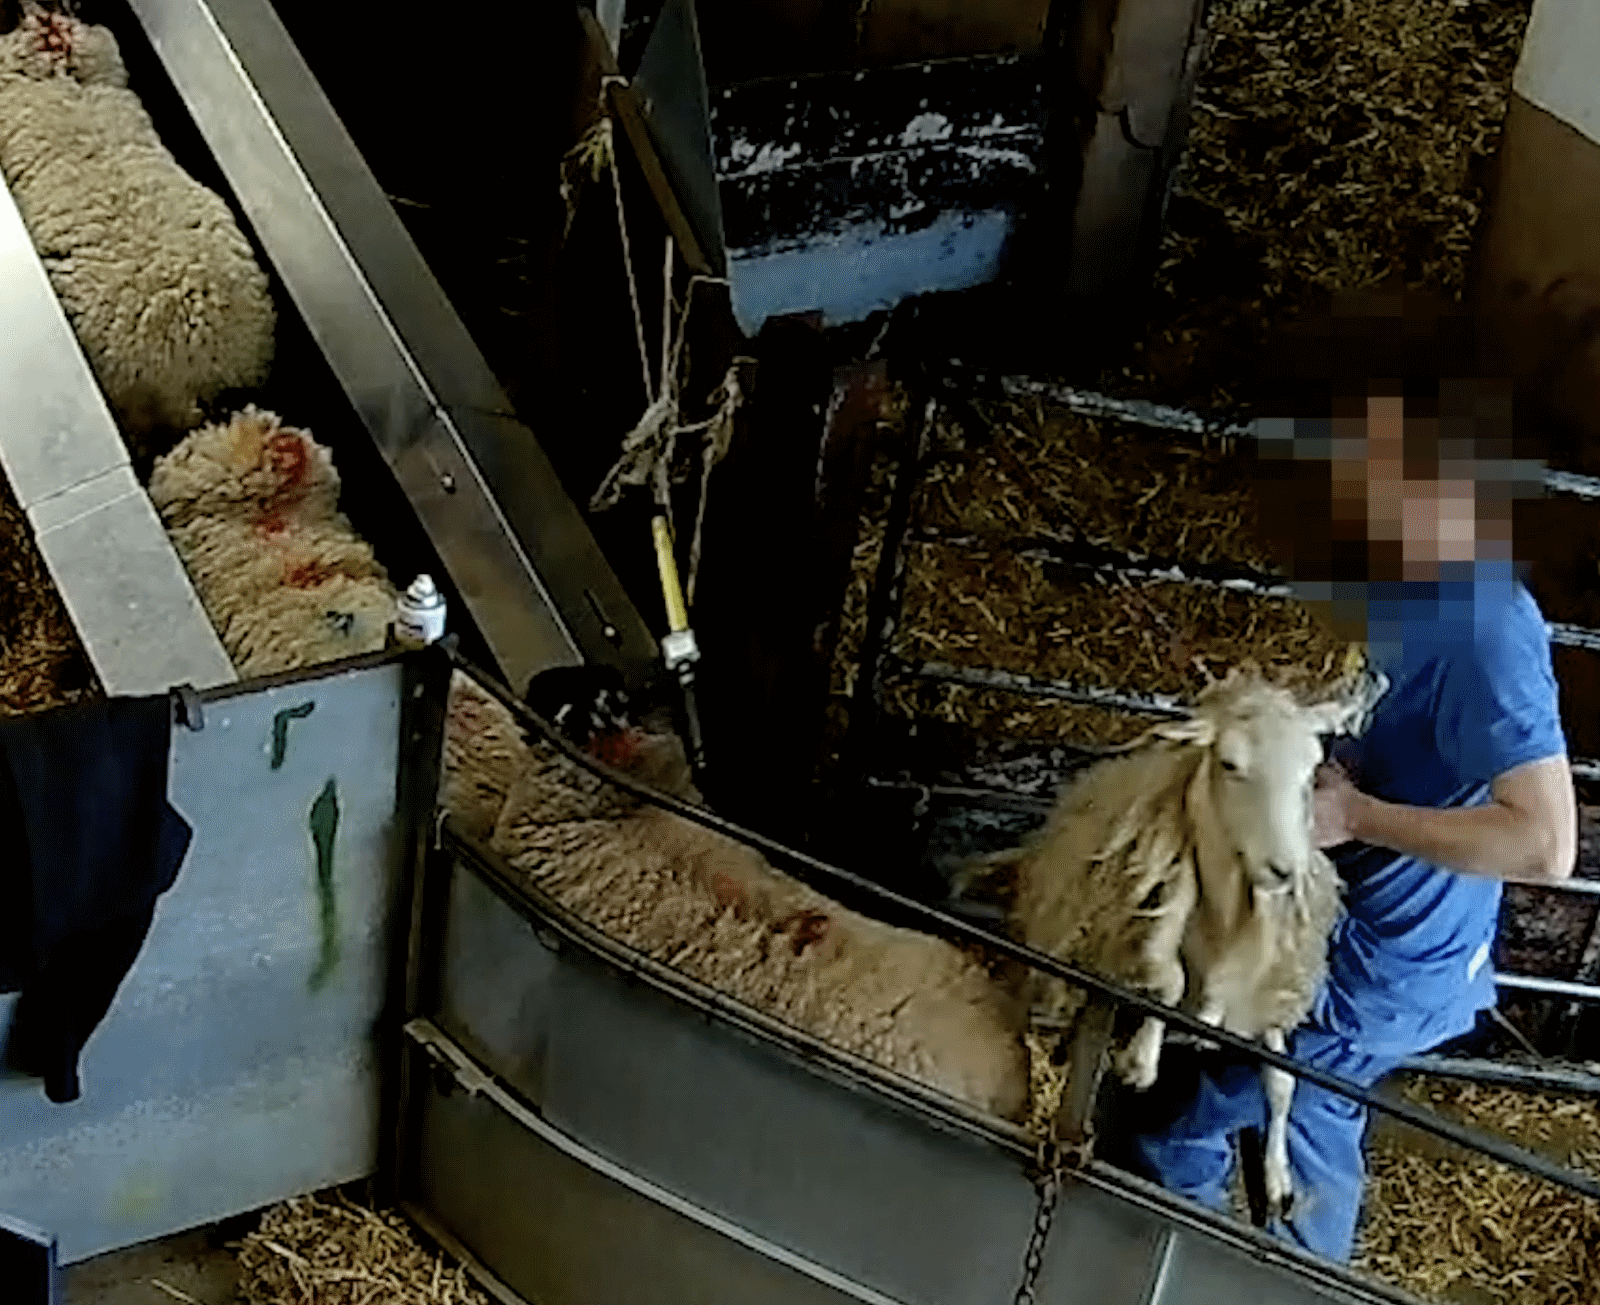 Sheep being roughly handled at Farmers Fresh slaughterhouse